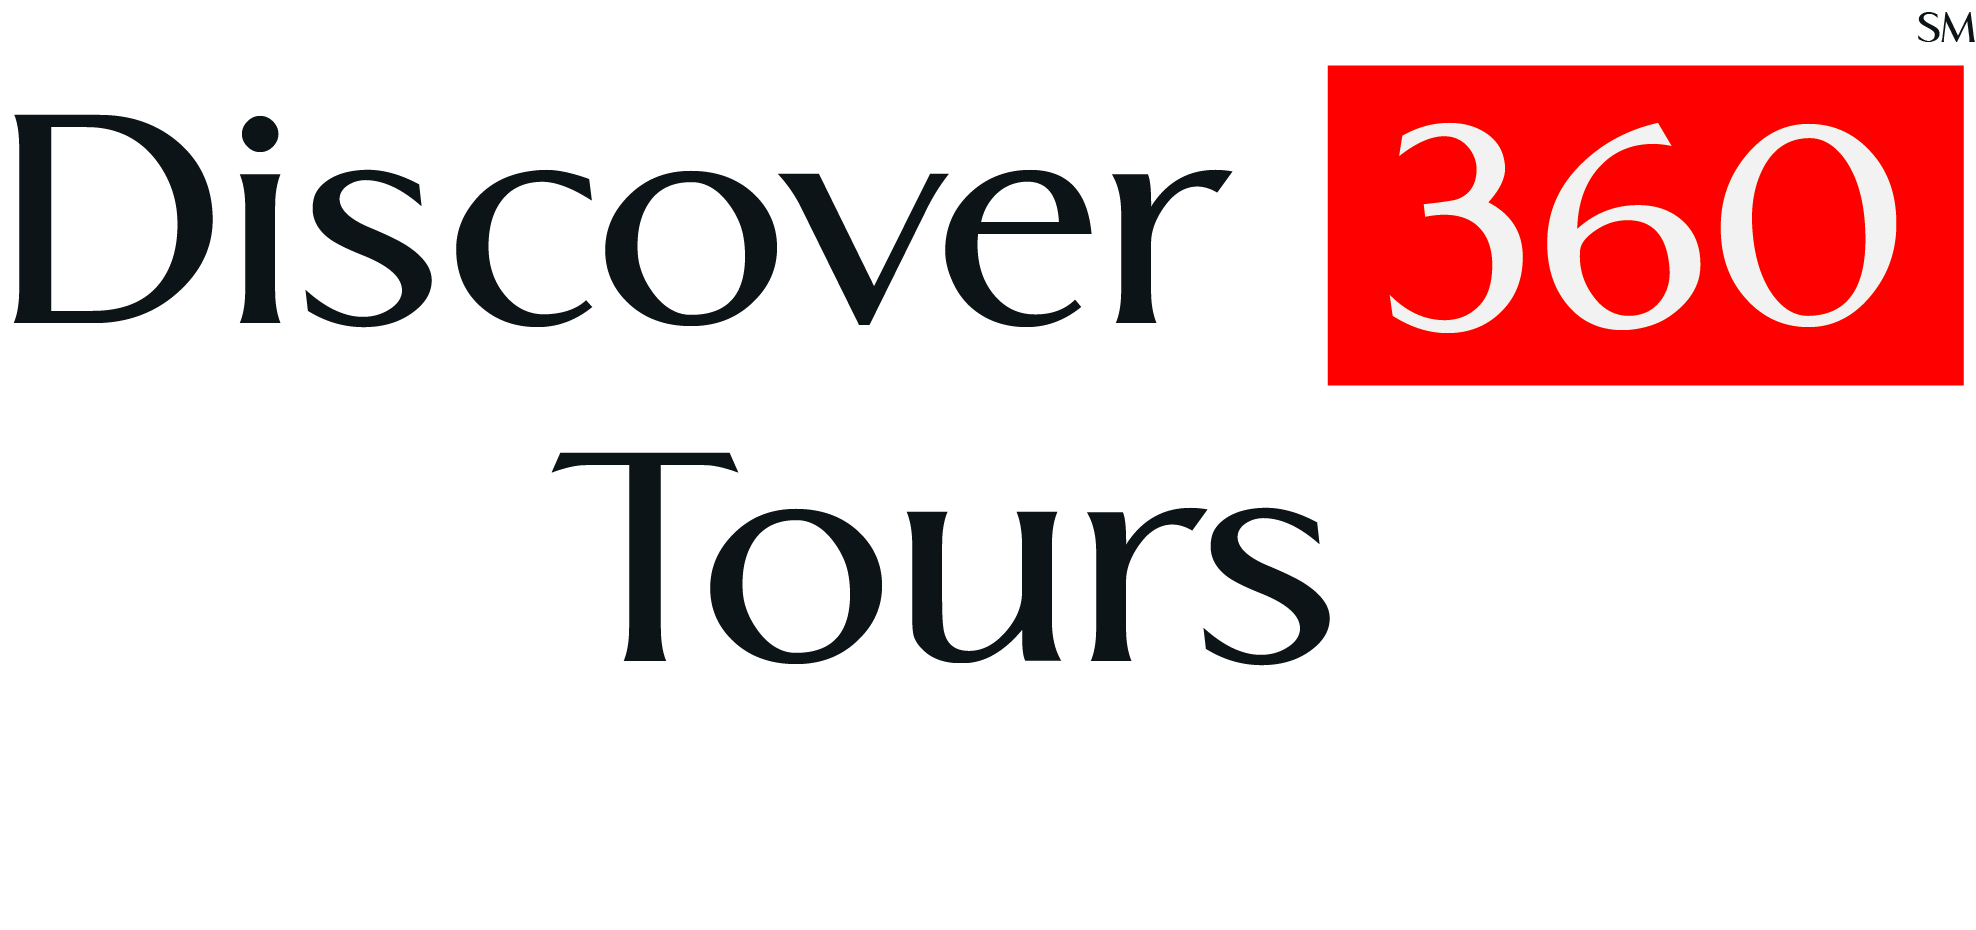 DISCOVER 360 TOURS